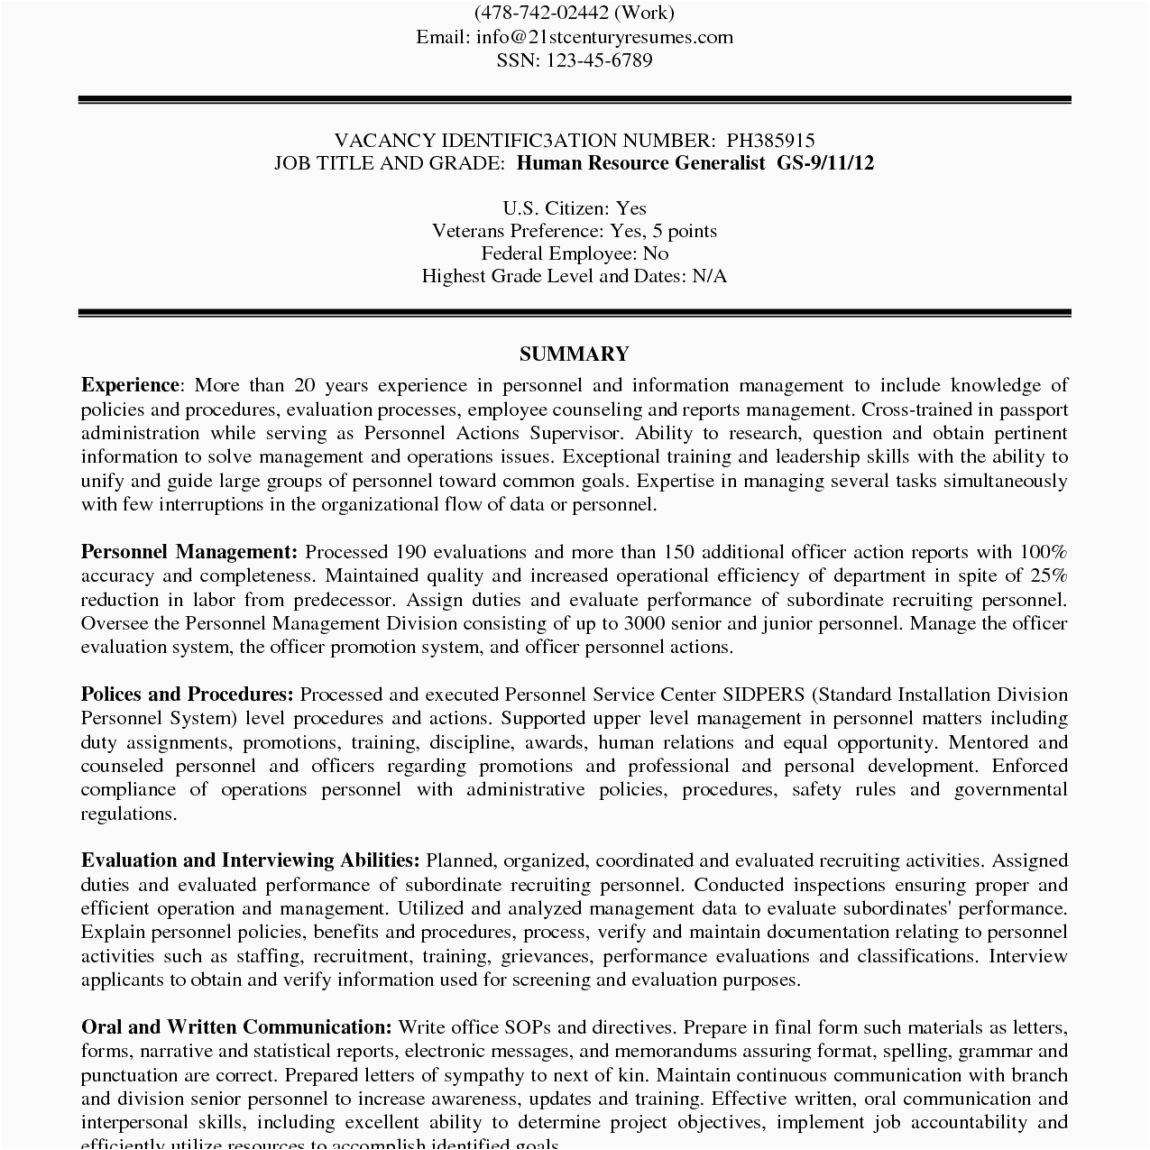 Sample Resume to Submit to Usajobs Usa Jobs Resume Examples